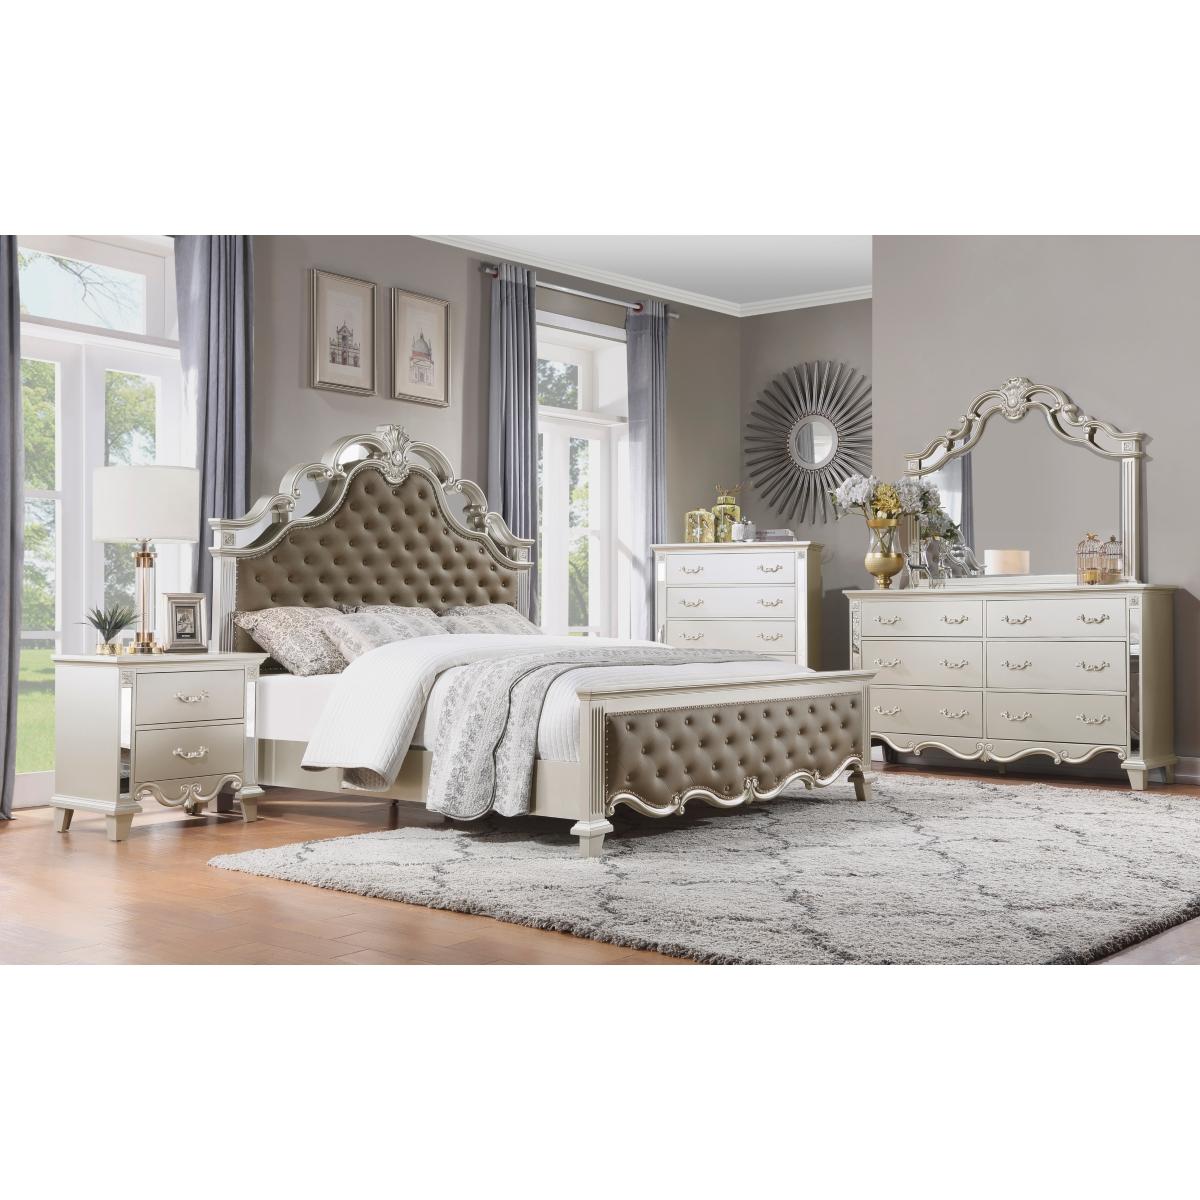 Traditional Bedroom Set 1429K-1CK*5PC Ever 1429K-1CK*5PC in Champagne Faux Leather